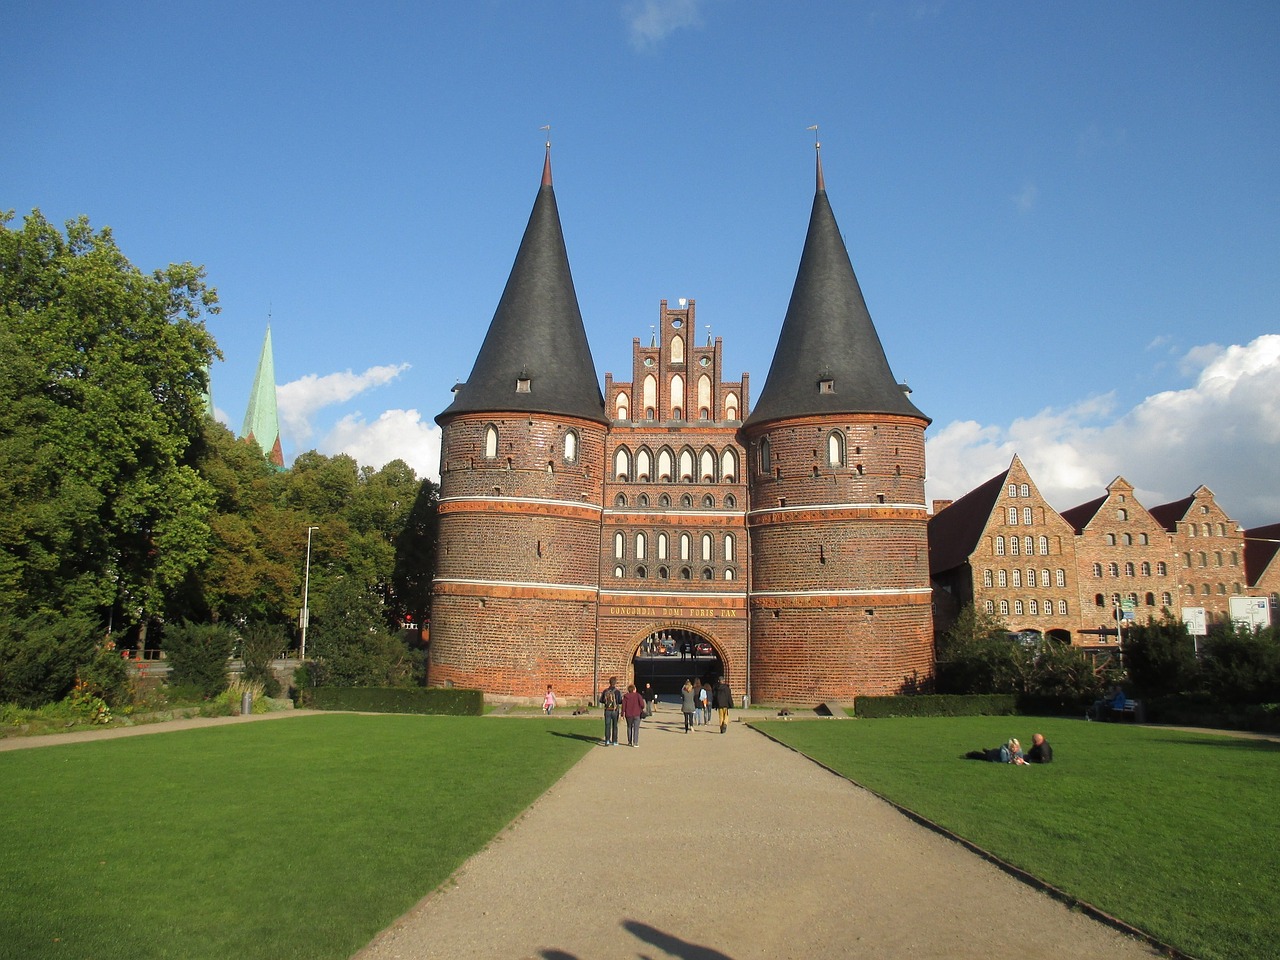 holsten gate,lübeck,historically,landmark,city gate,hanseatic city,architecture,places of interest,monument,free pictures, free photos, free images, royalty free, free illustrations, public domain